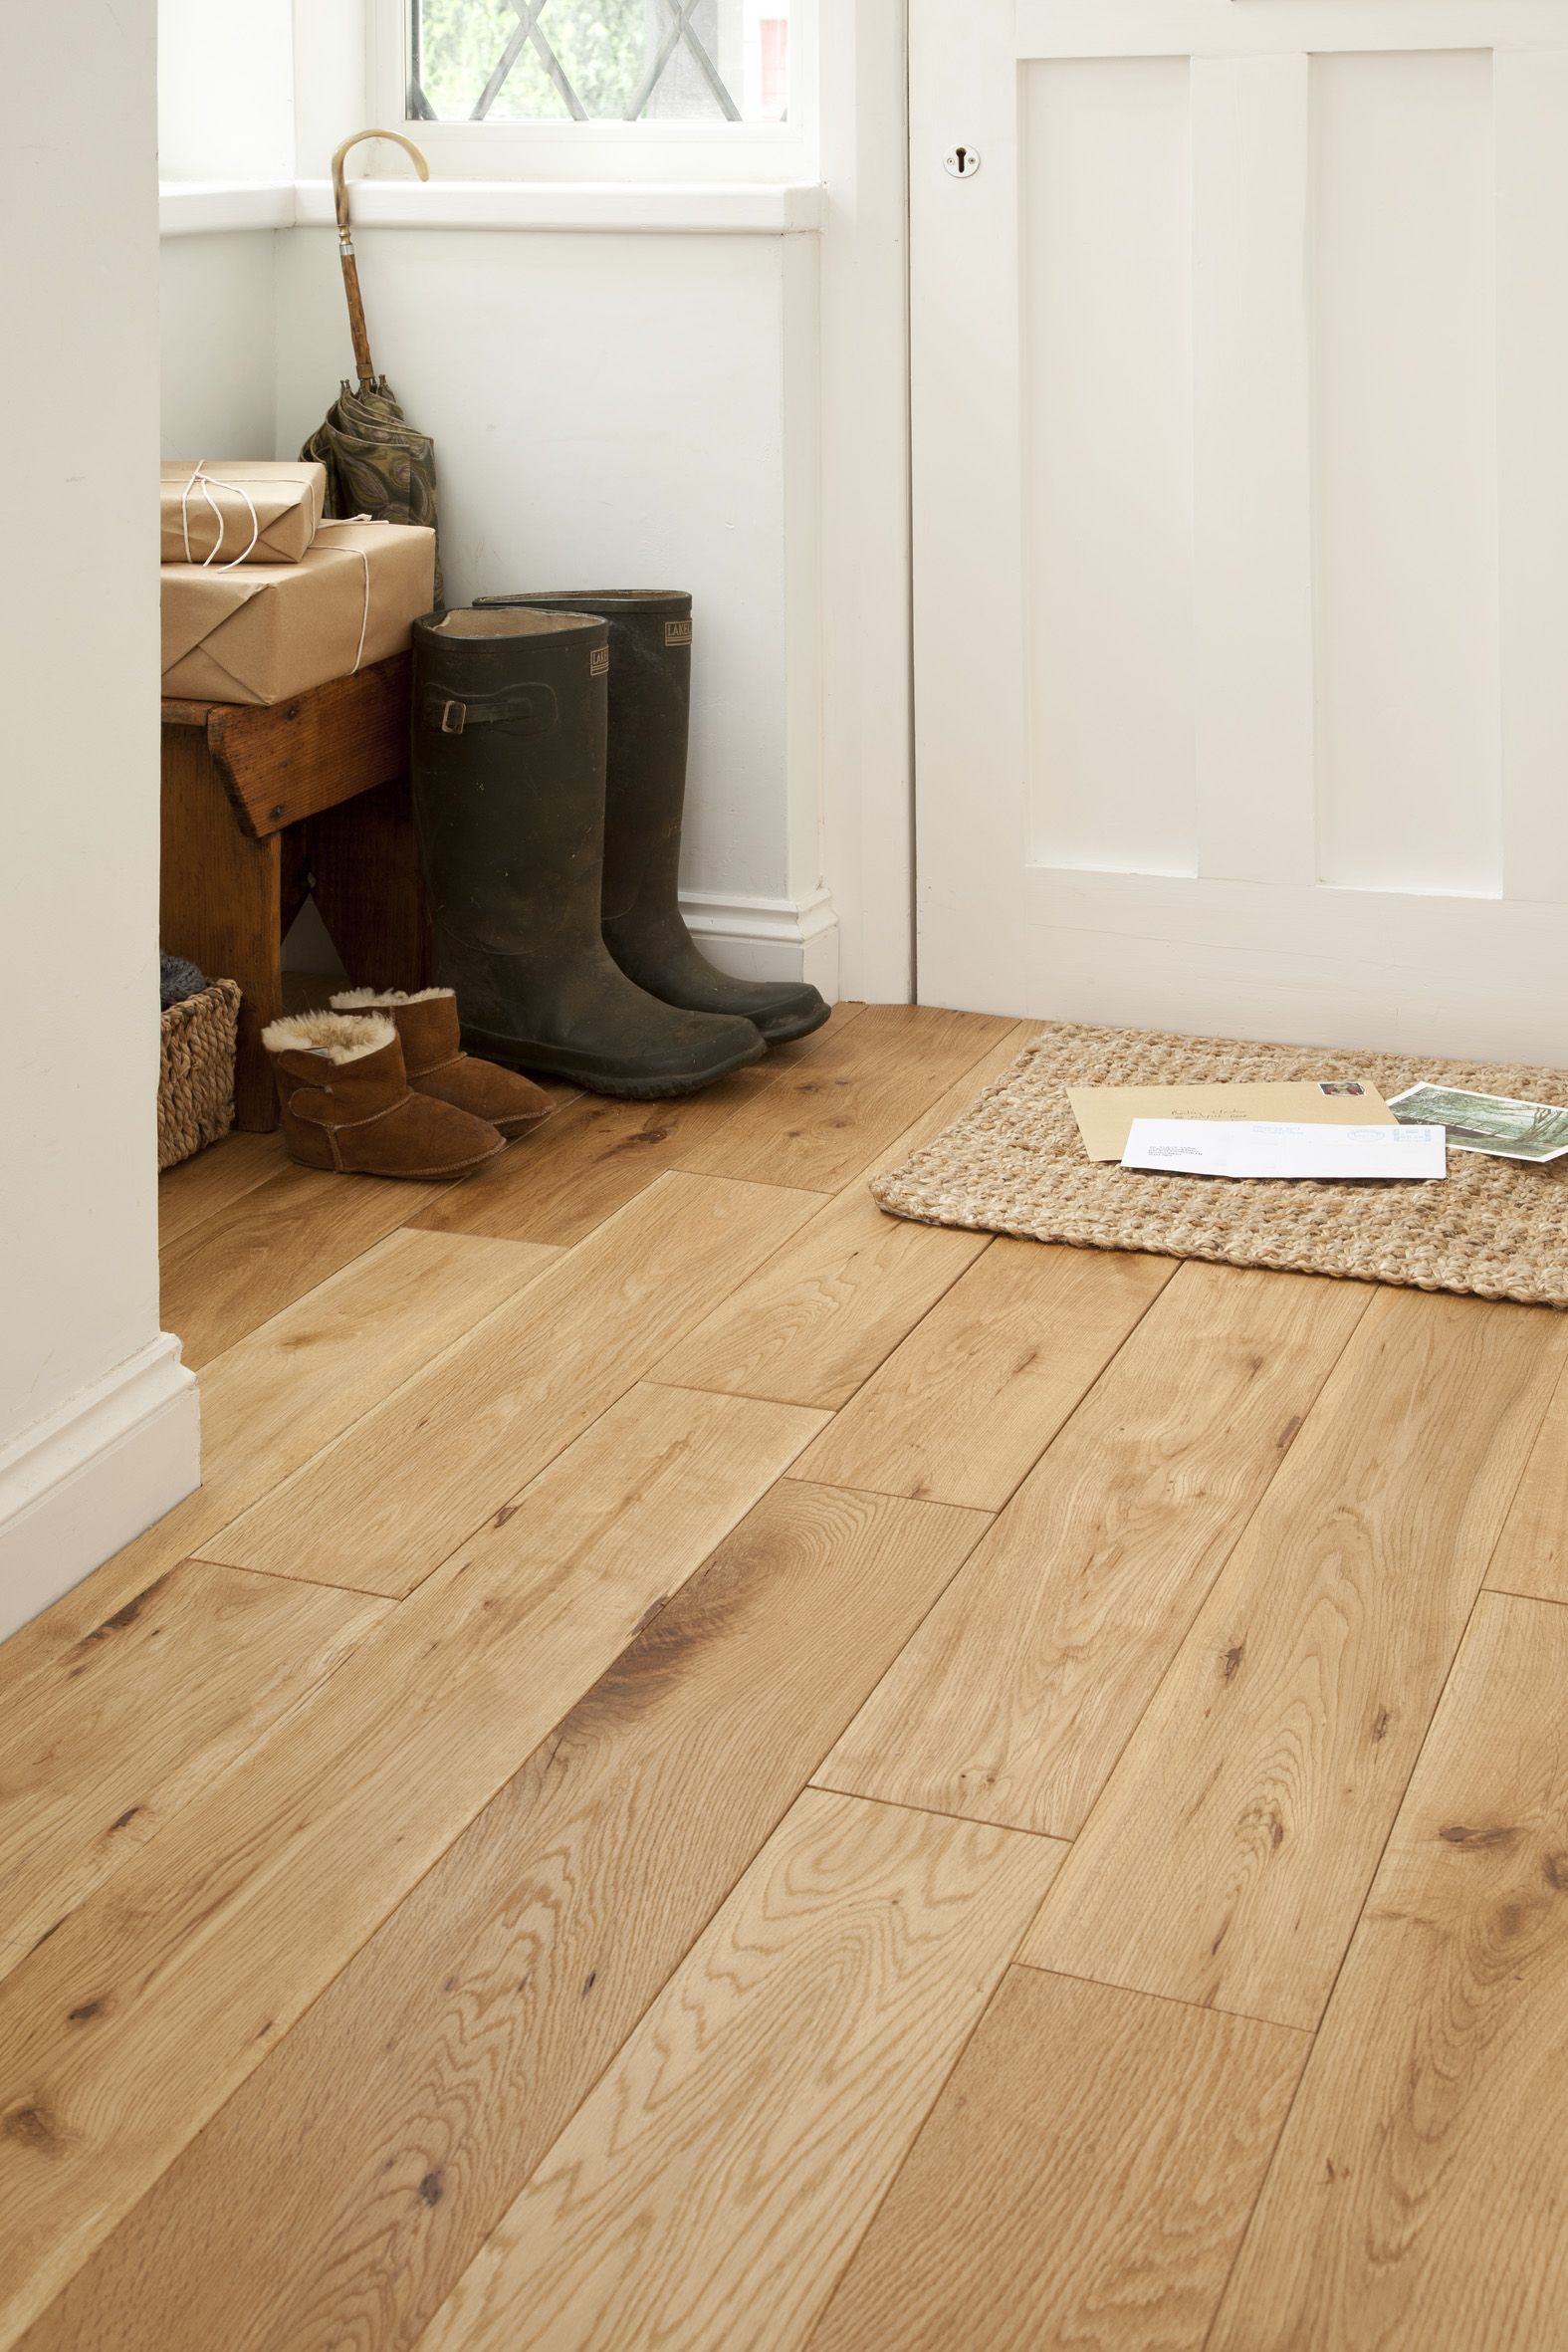 How to save money with solid oak flooring?